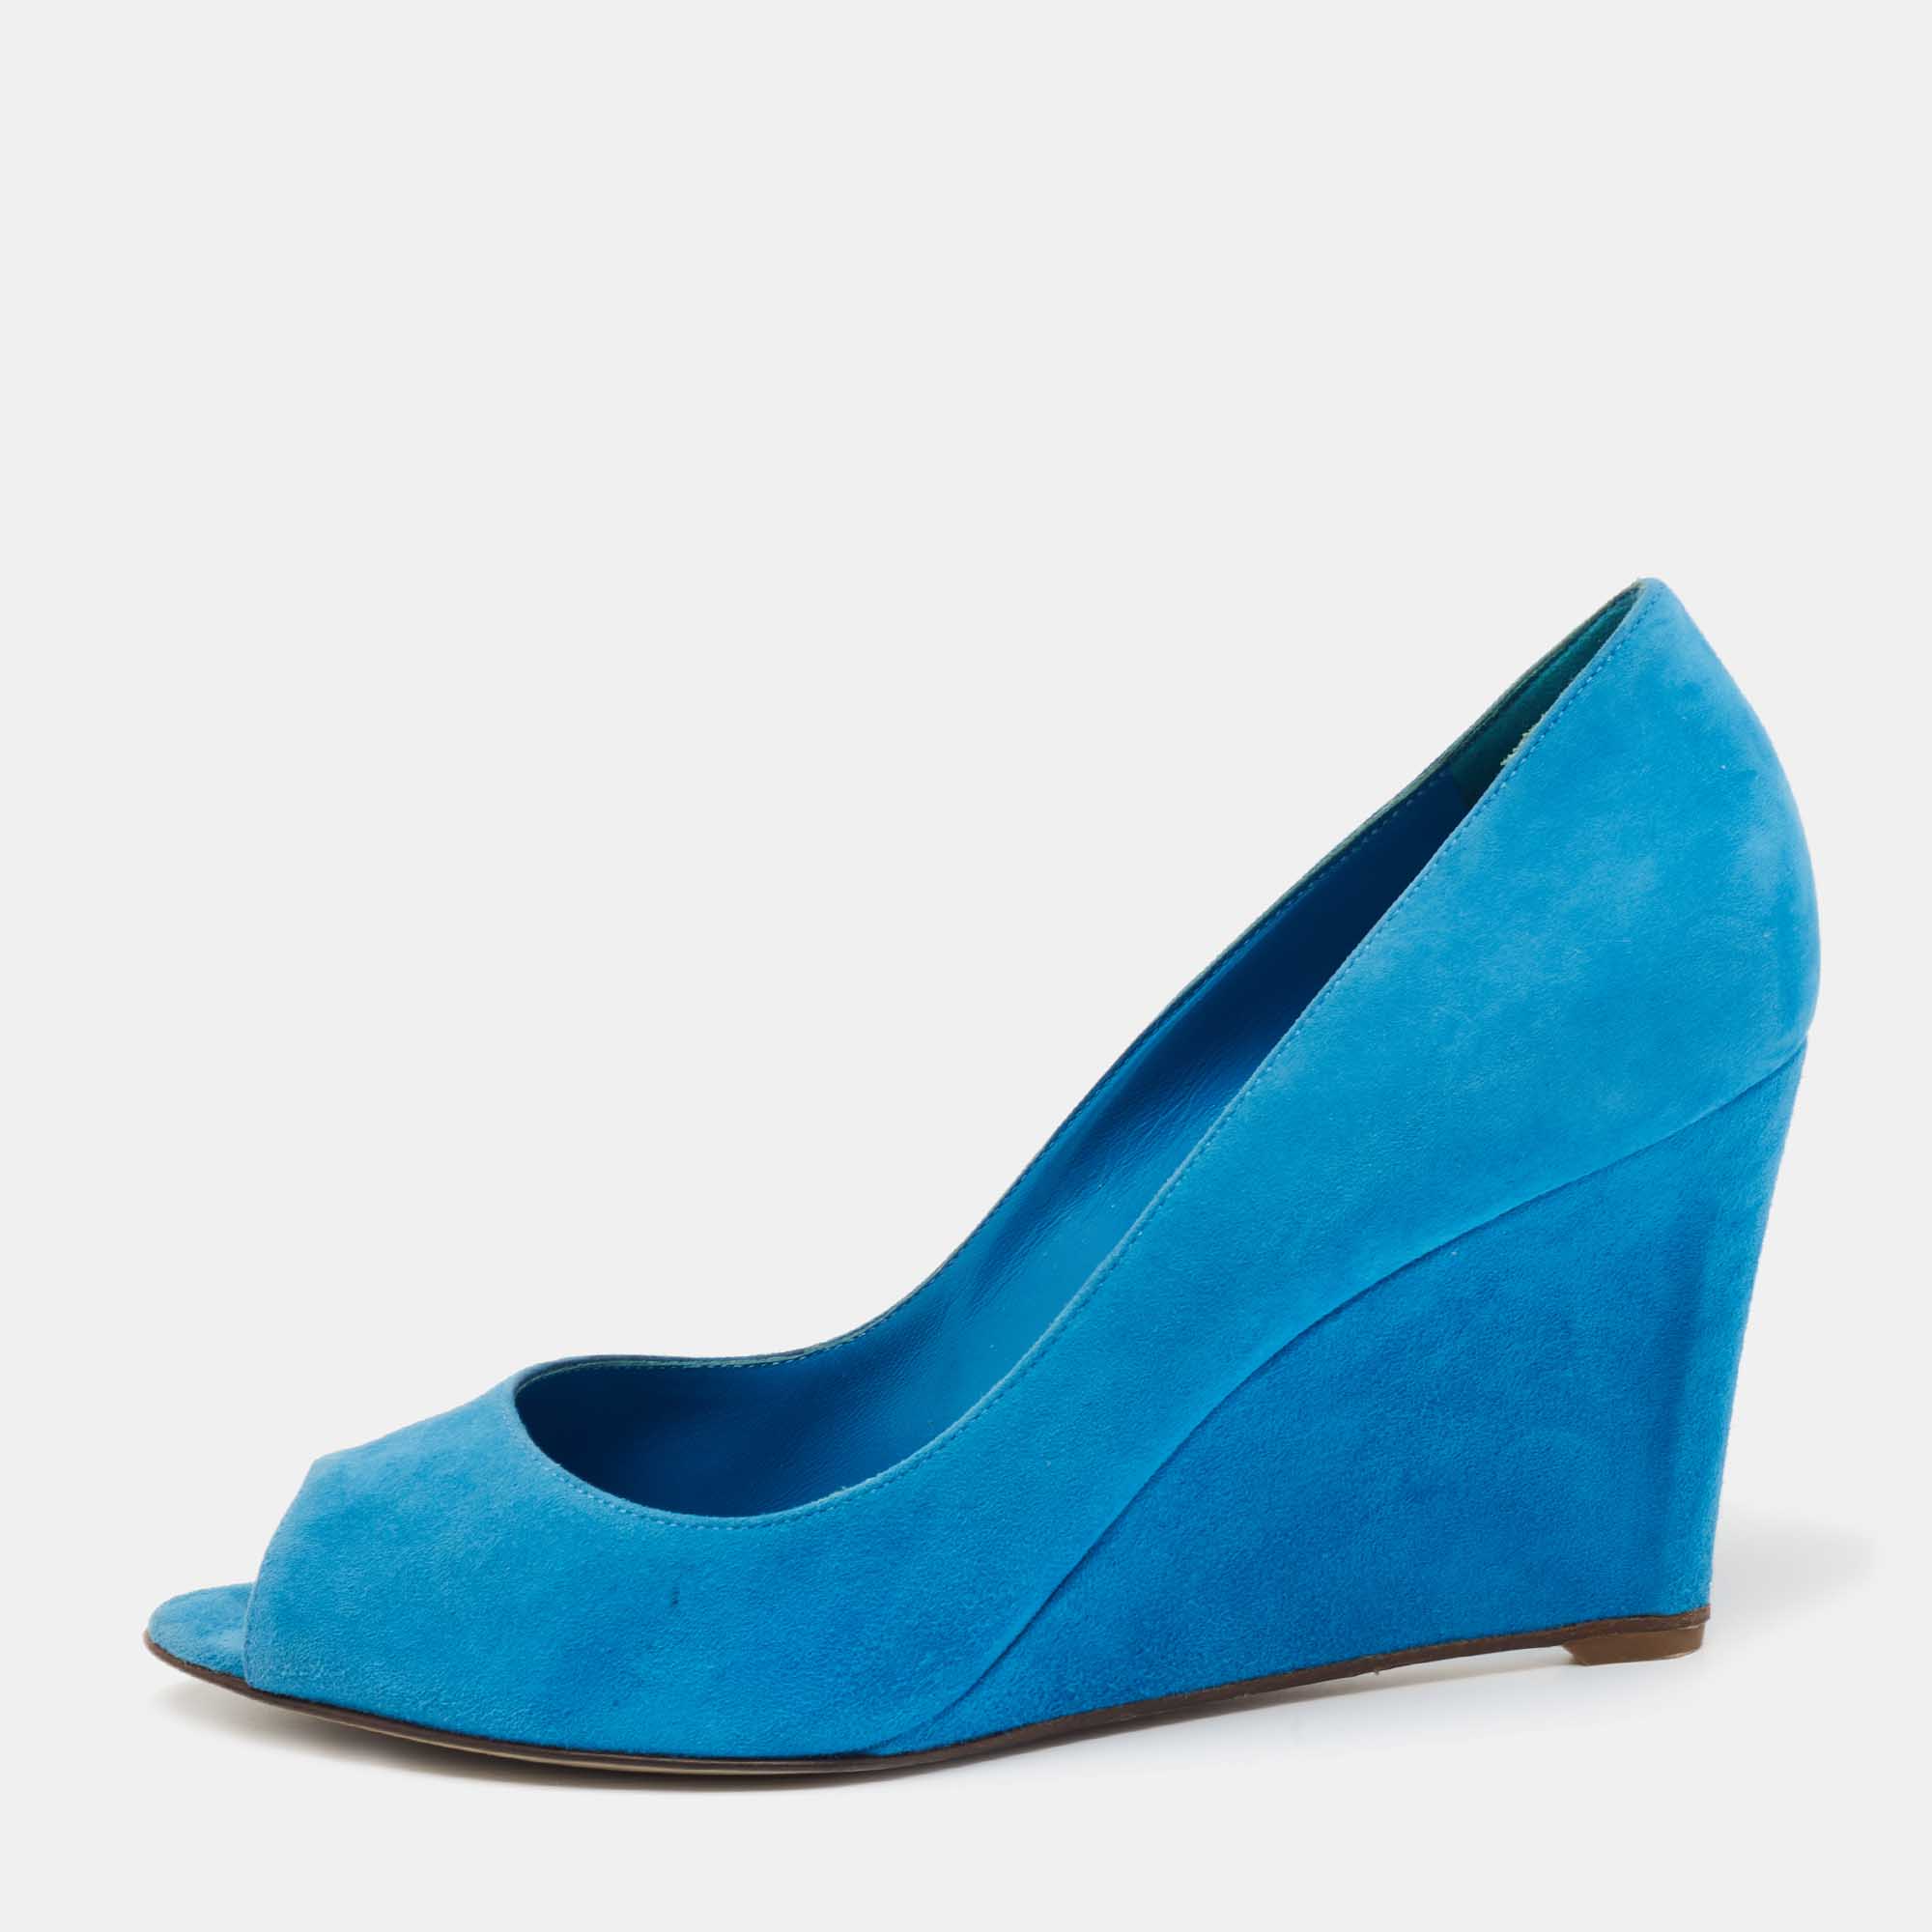 These Sergio Rossi pumps are elegant feminine and easy to style. Made from soft suede they flaunt an appealing shade of blue and covetable peep toes. The pair is complete with 9 cm wedge heels for the right amount of elevation.